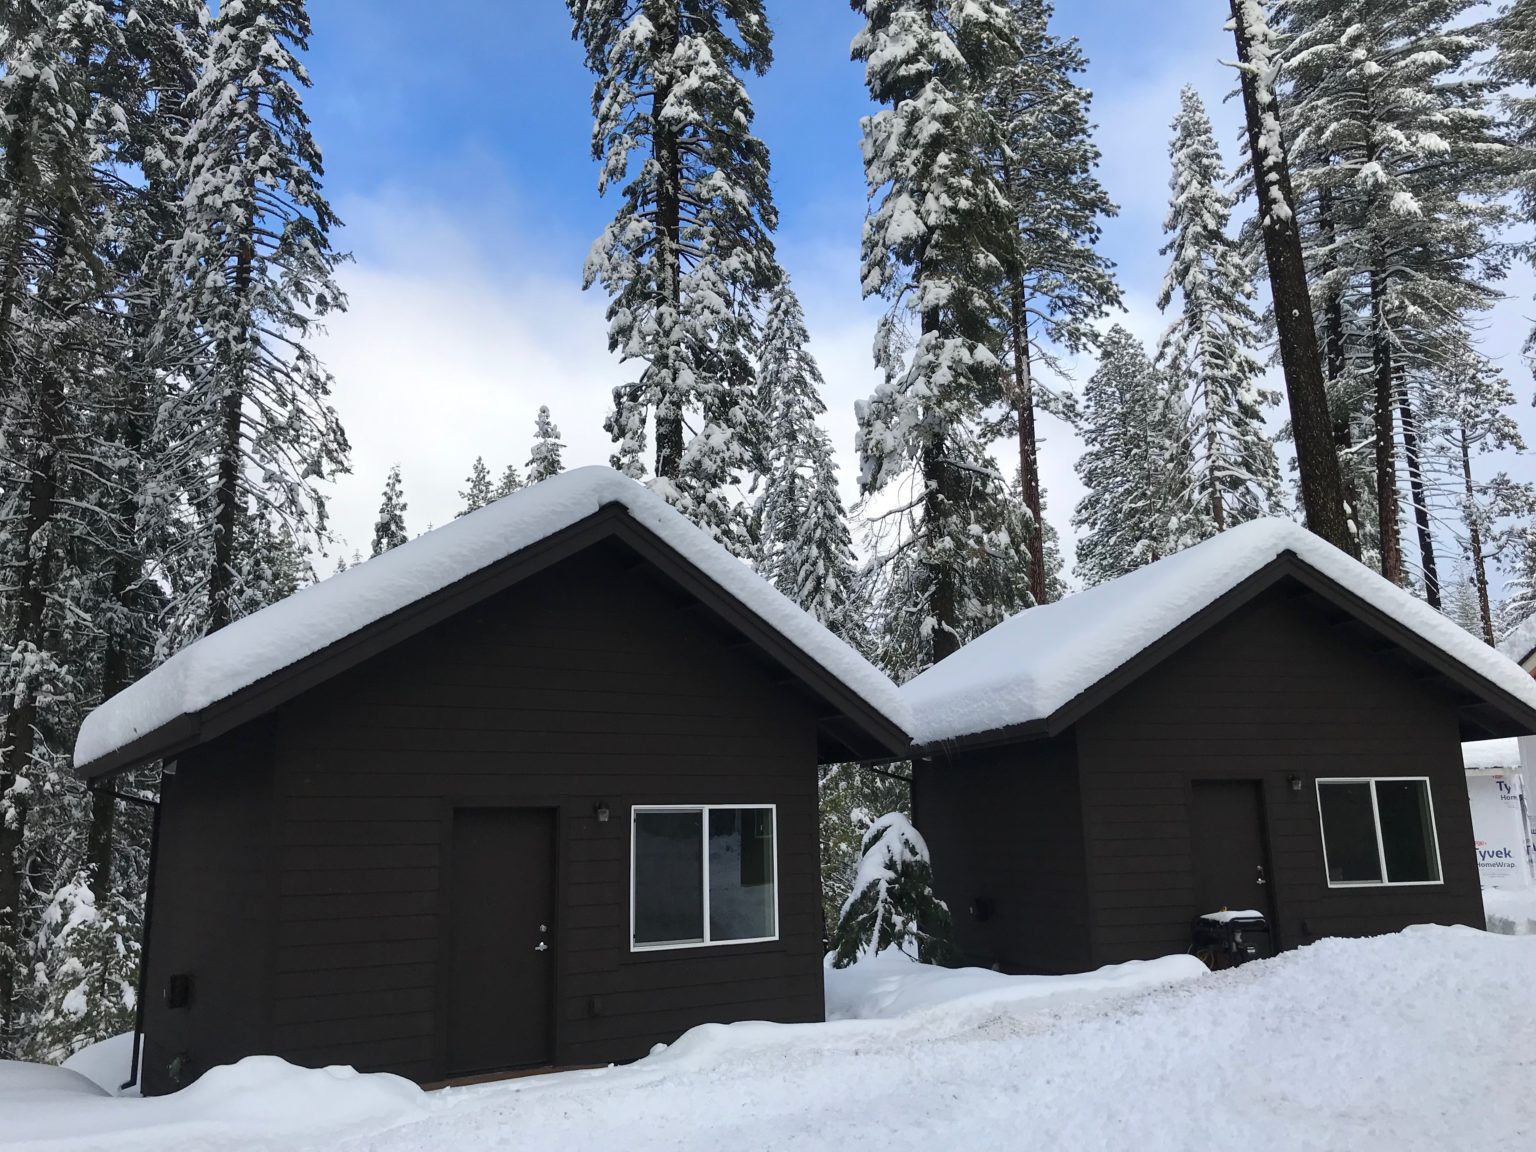 Year round cabins at Camp Oski in the winter covered in snow